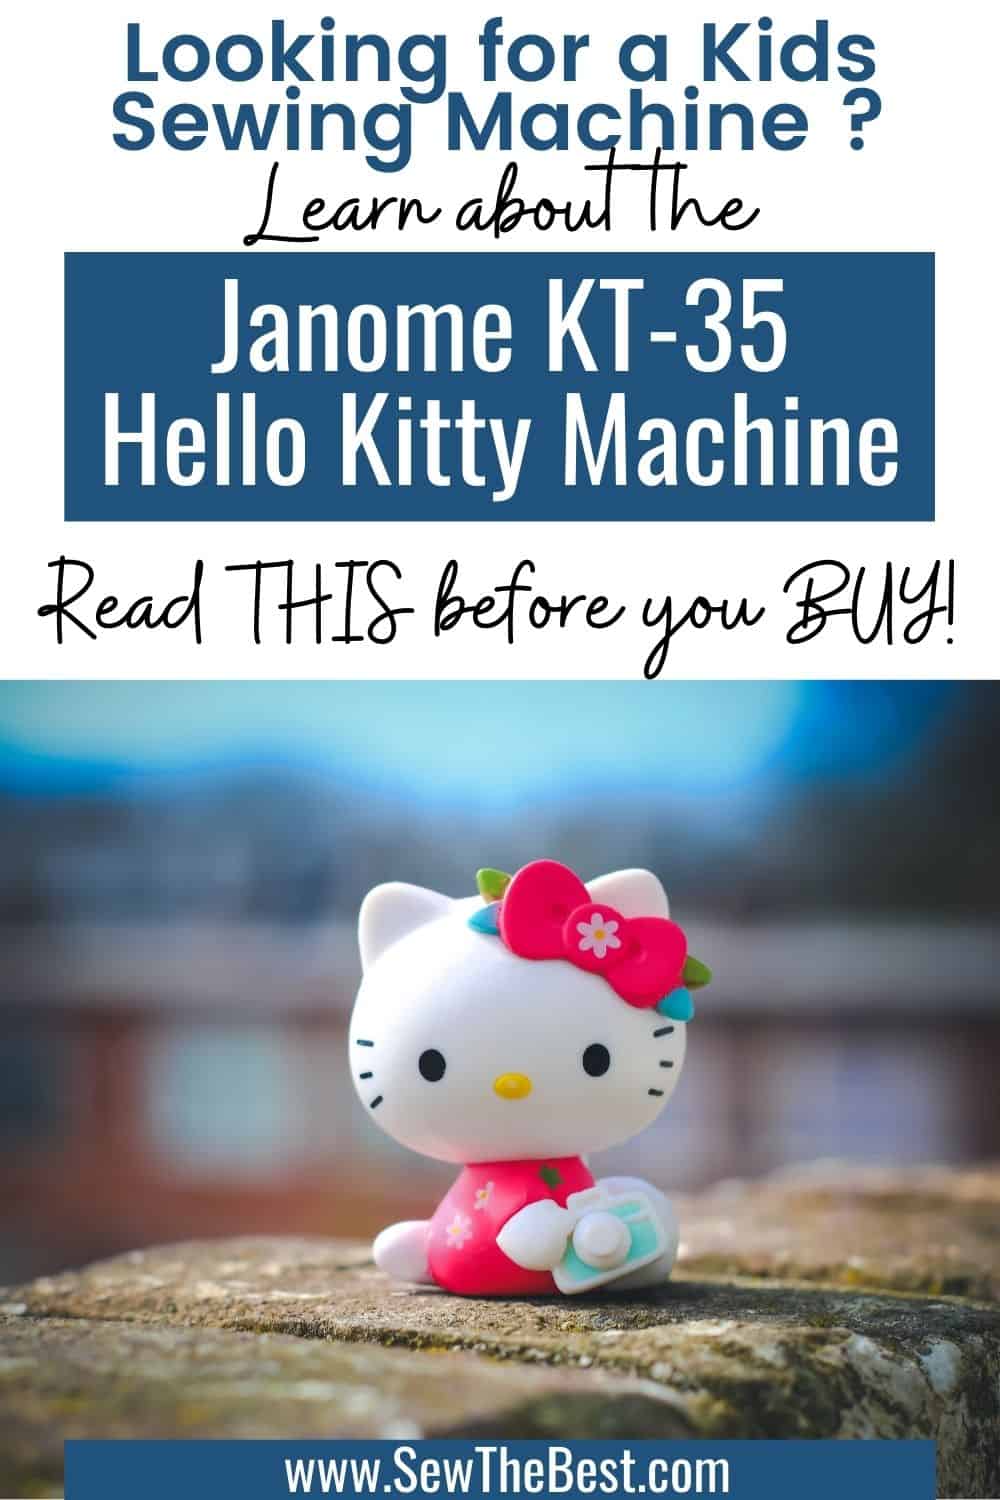 Hello Kitty KT-35 review. Are these sewing machines just toys? Learn more about the Hello Kitty sewing machines. #AD #SewingMachine #Sewing #HelloKitty